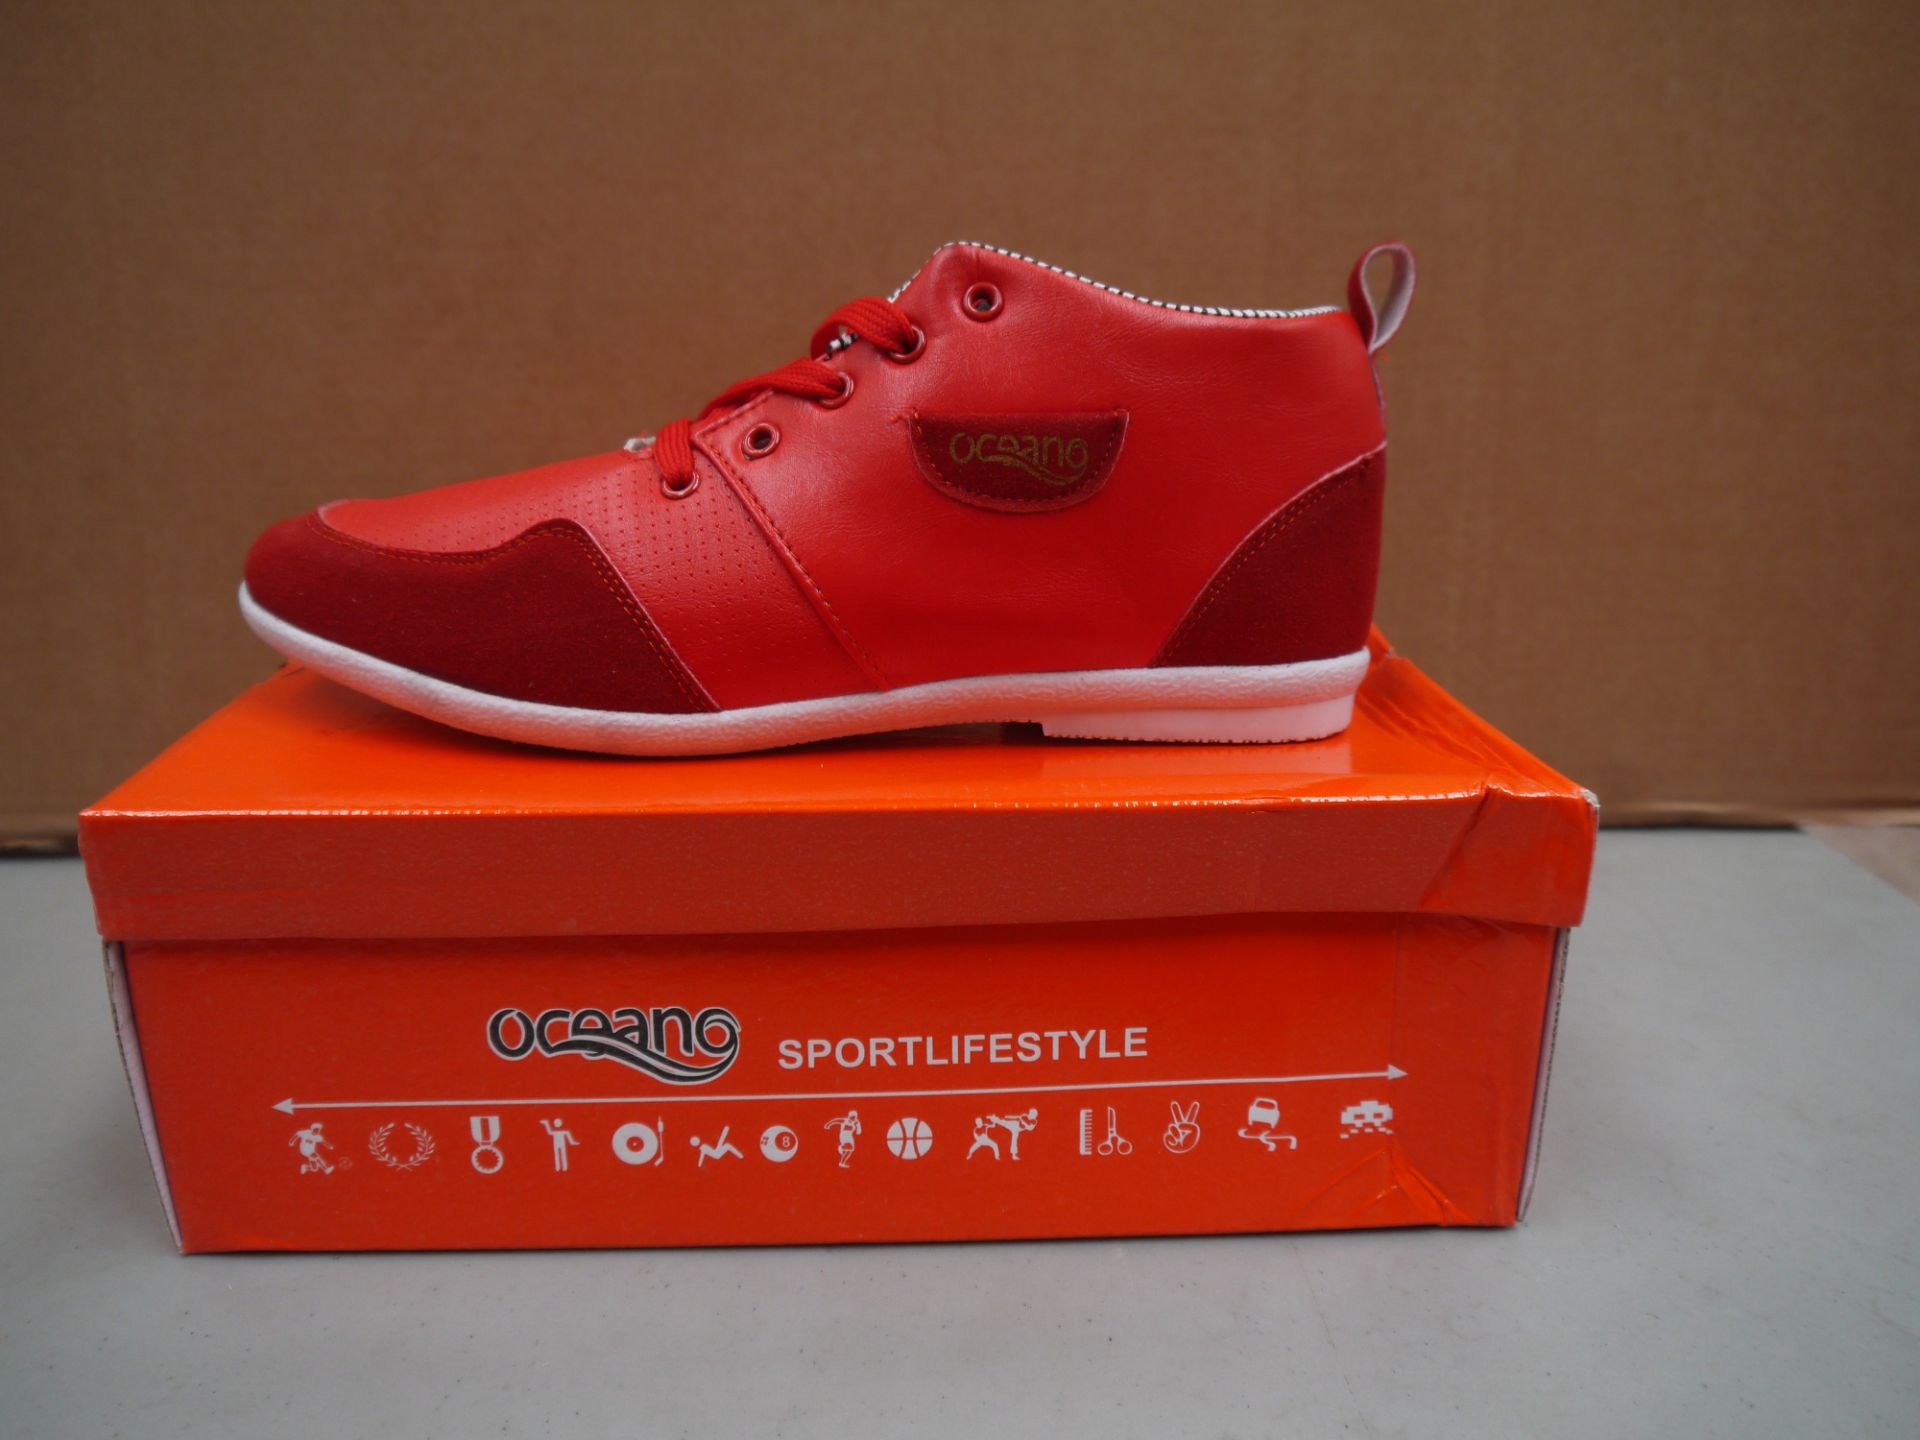 Mens Red Suede and leather Oceano trainer style boot new and boxed size UK10